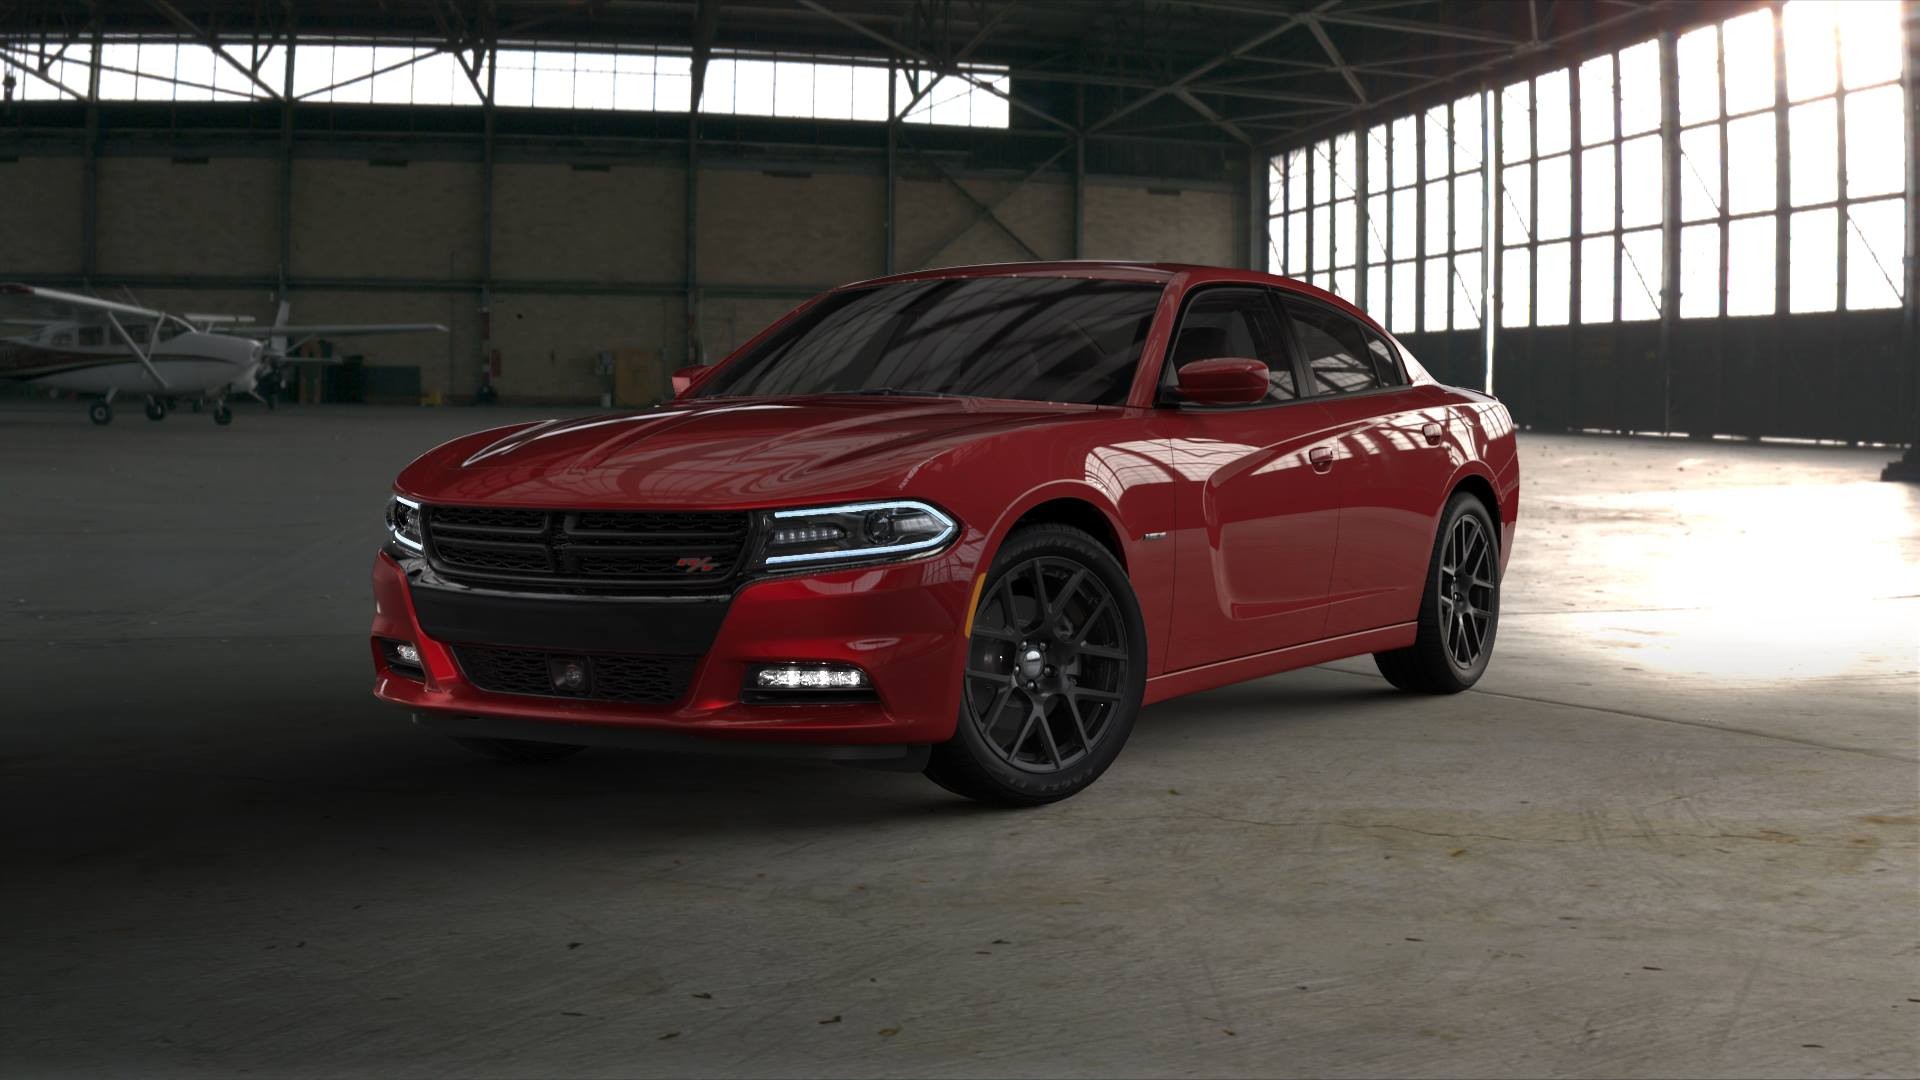 General 1920x1080 Dodge Dodge Charger car muscle cars red cars vehicle aircraft American cars Stellantis